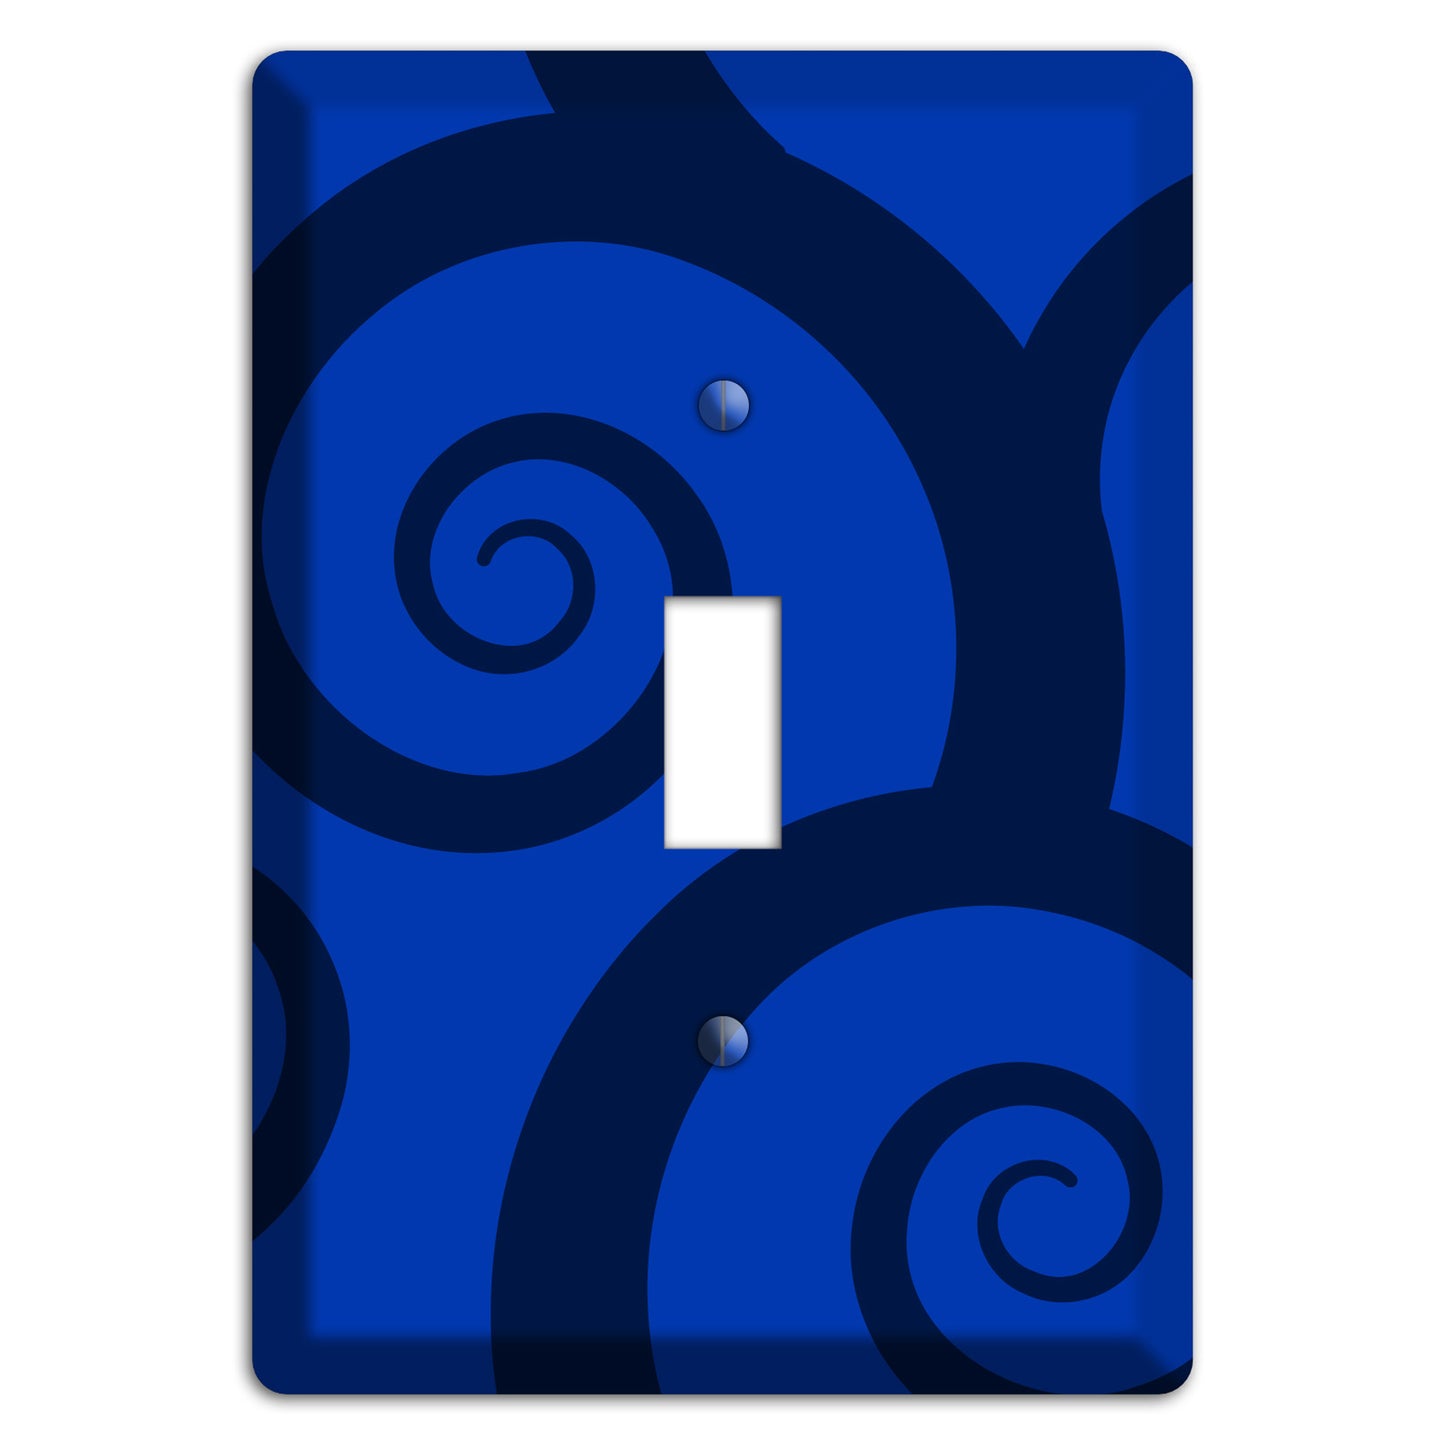 Blue Large Swirl Cover Plates